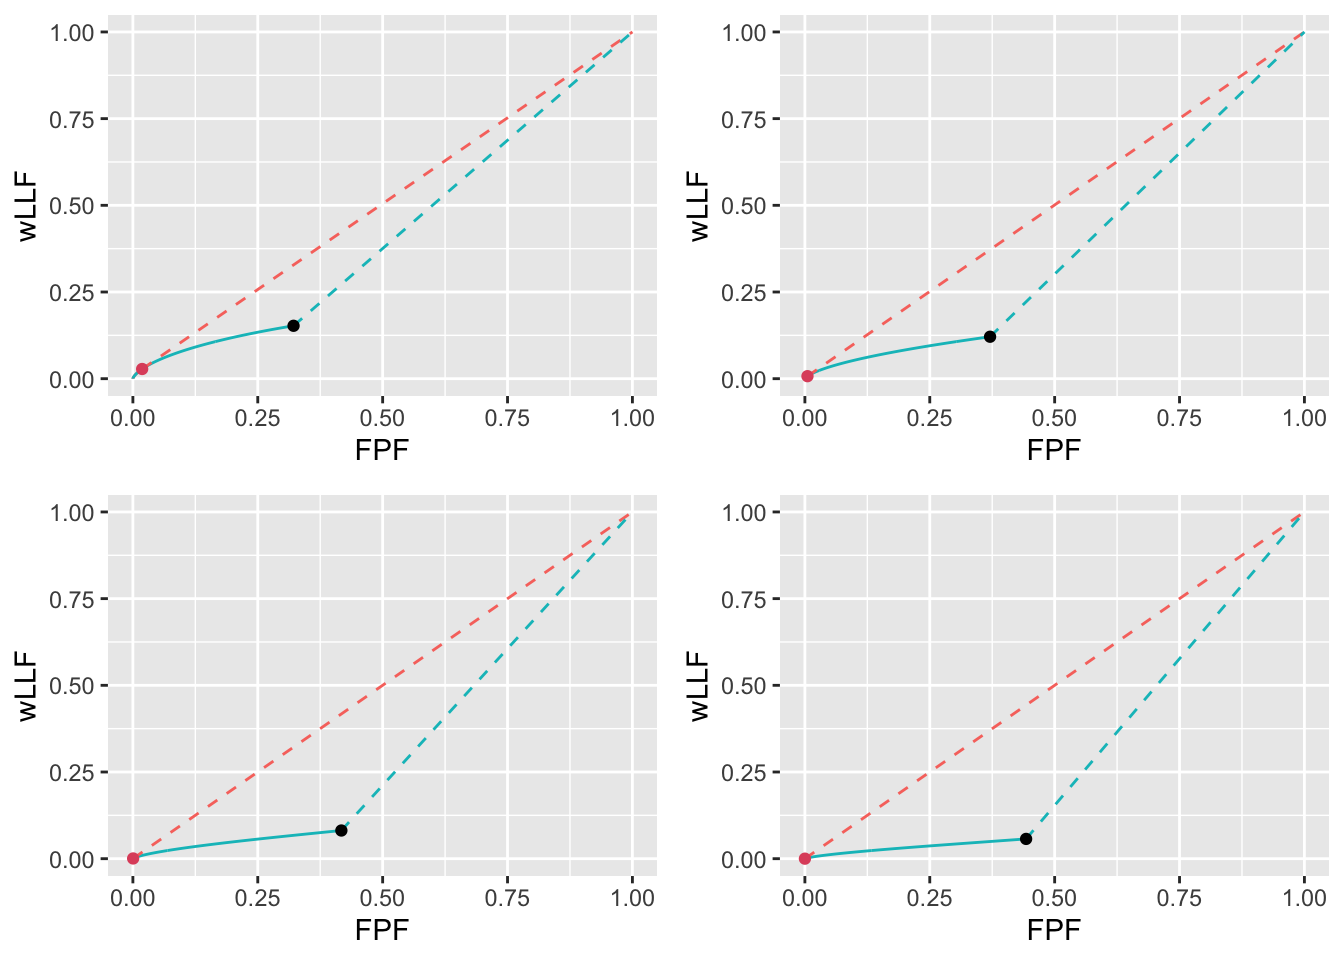 Low performance varying $\lambda$ wAFROC plots for the two optimization methods with superimposed operating points. The color coding is as in previous figures. The values of $\lambda$ are: top-left $\lambda = 1$, top-right $\lambda = 2$, bottom-left $\lambda = 5$ and bottom-right $\lambda = 10$.